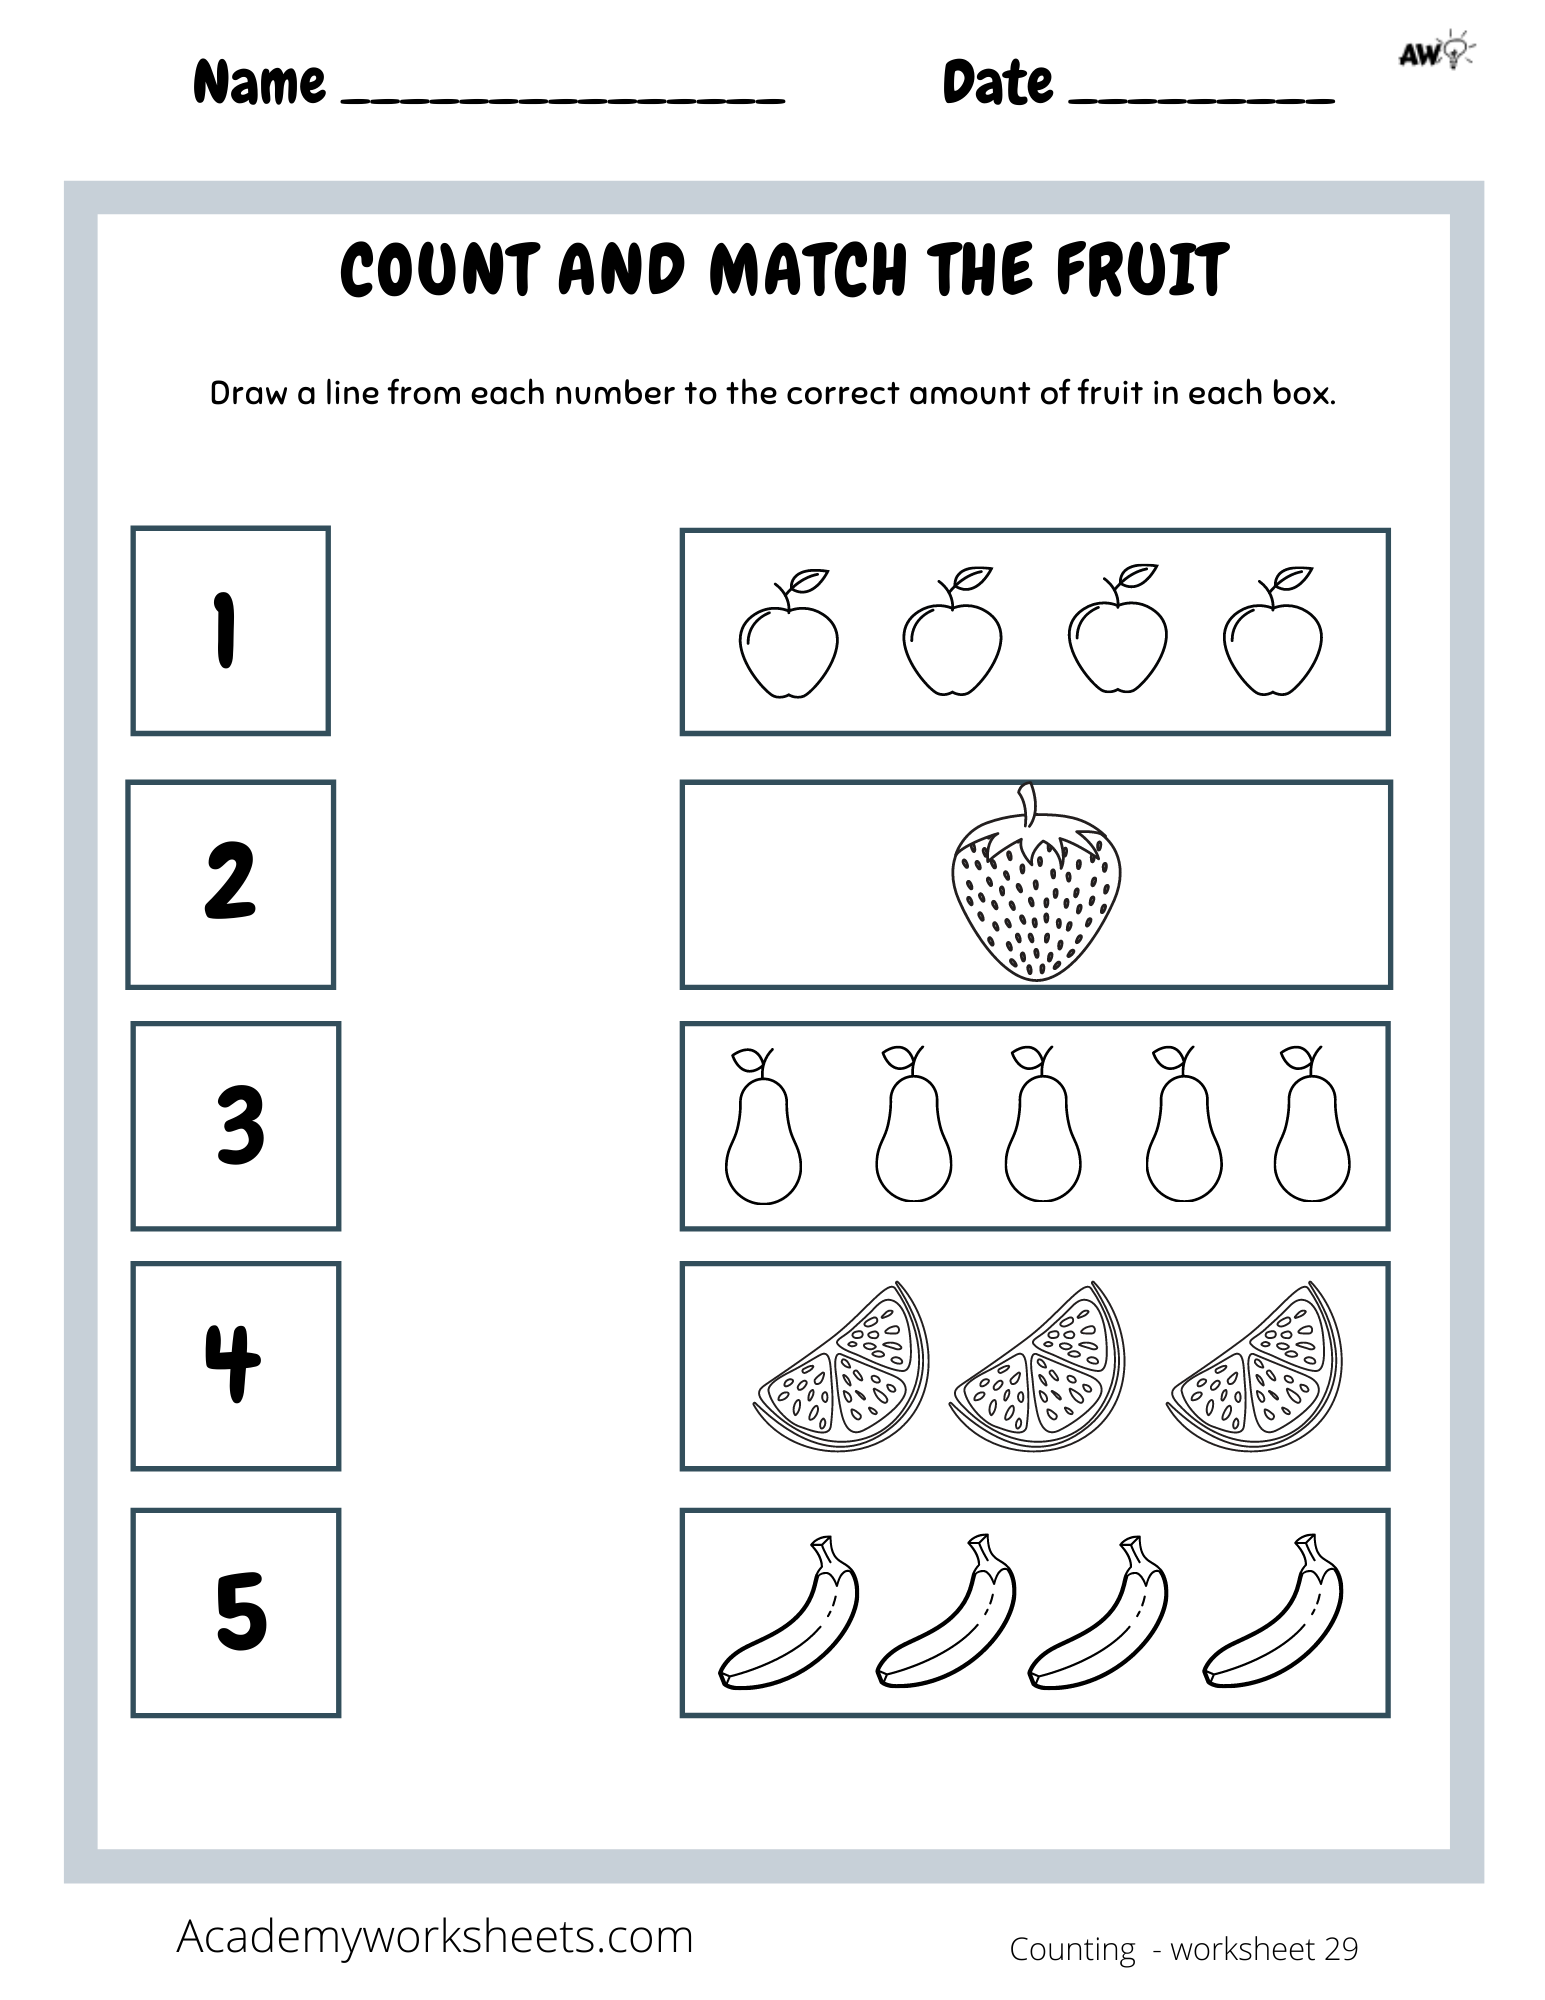 count-and-match-numbers-1-5-worksheets-academy-worksheets